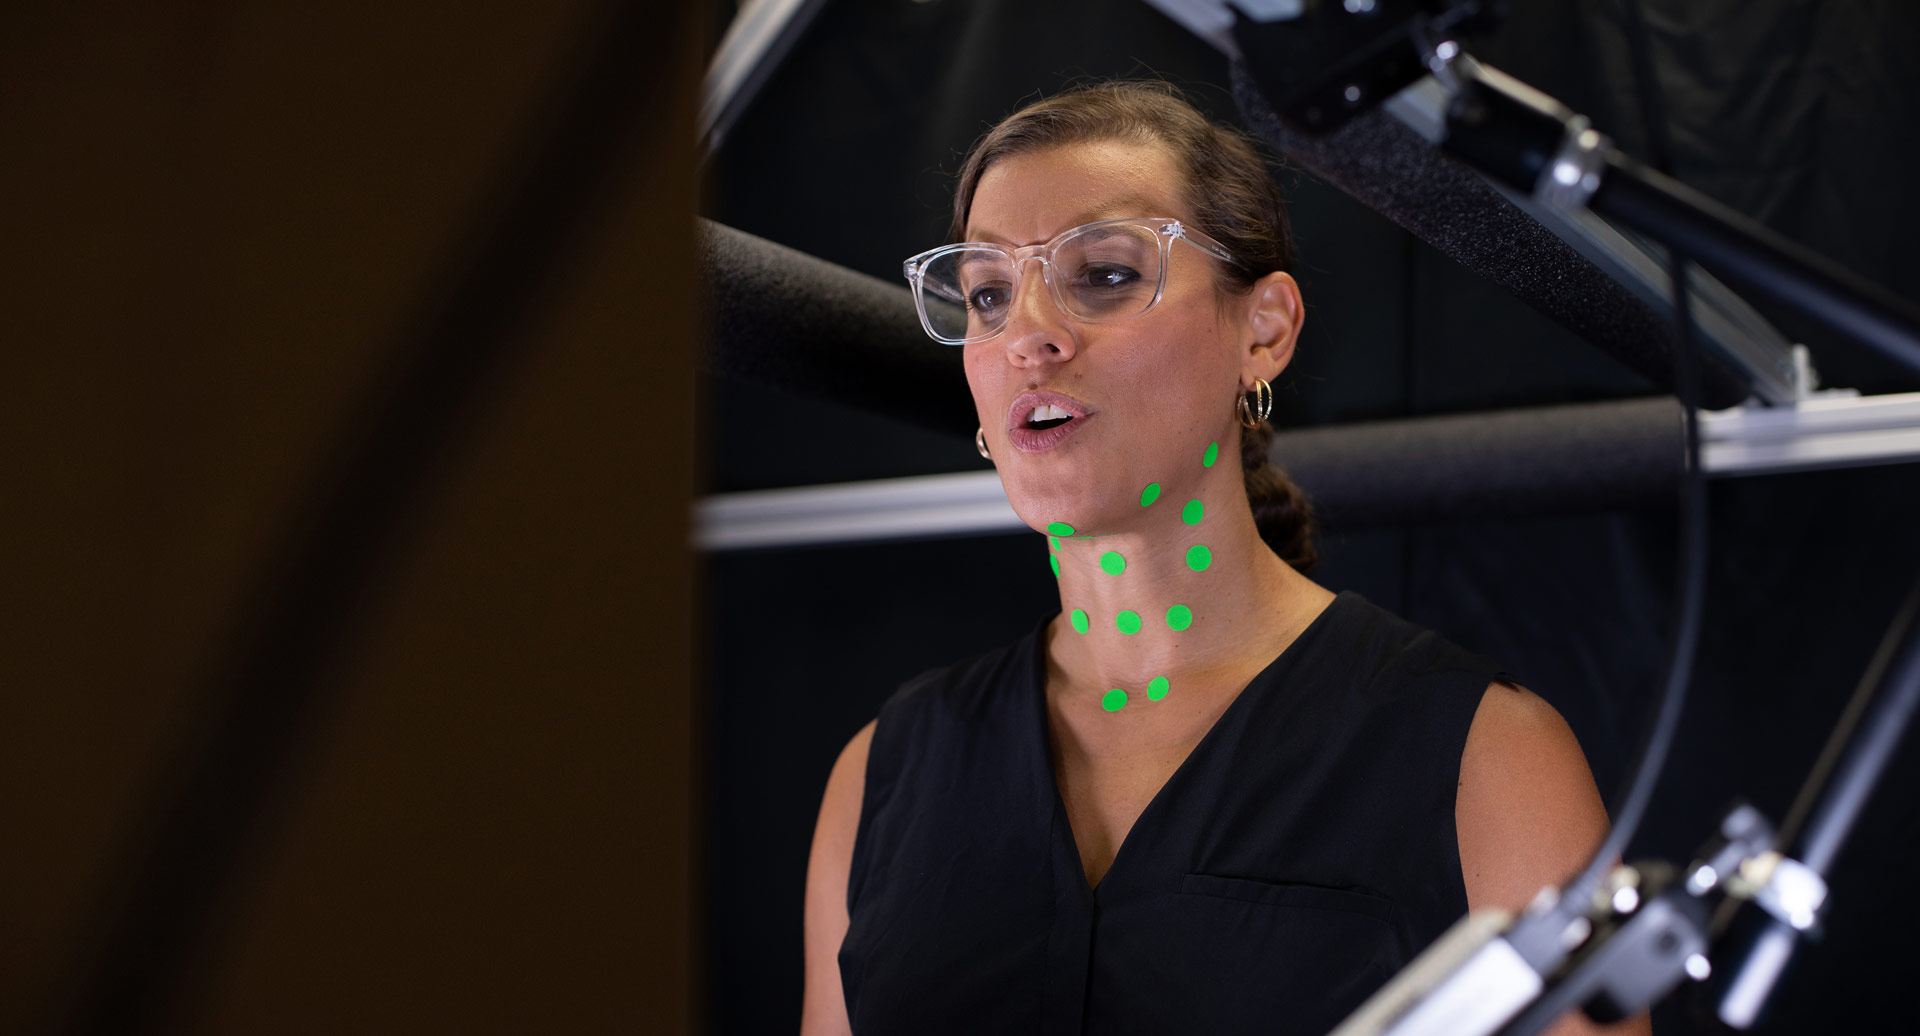 Adrianna Shembel singing. She has green dots affixed to her chin and neck.